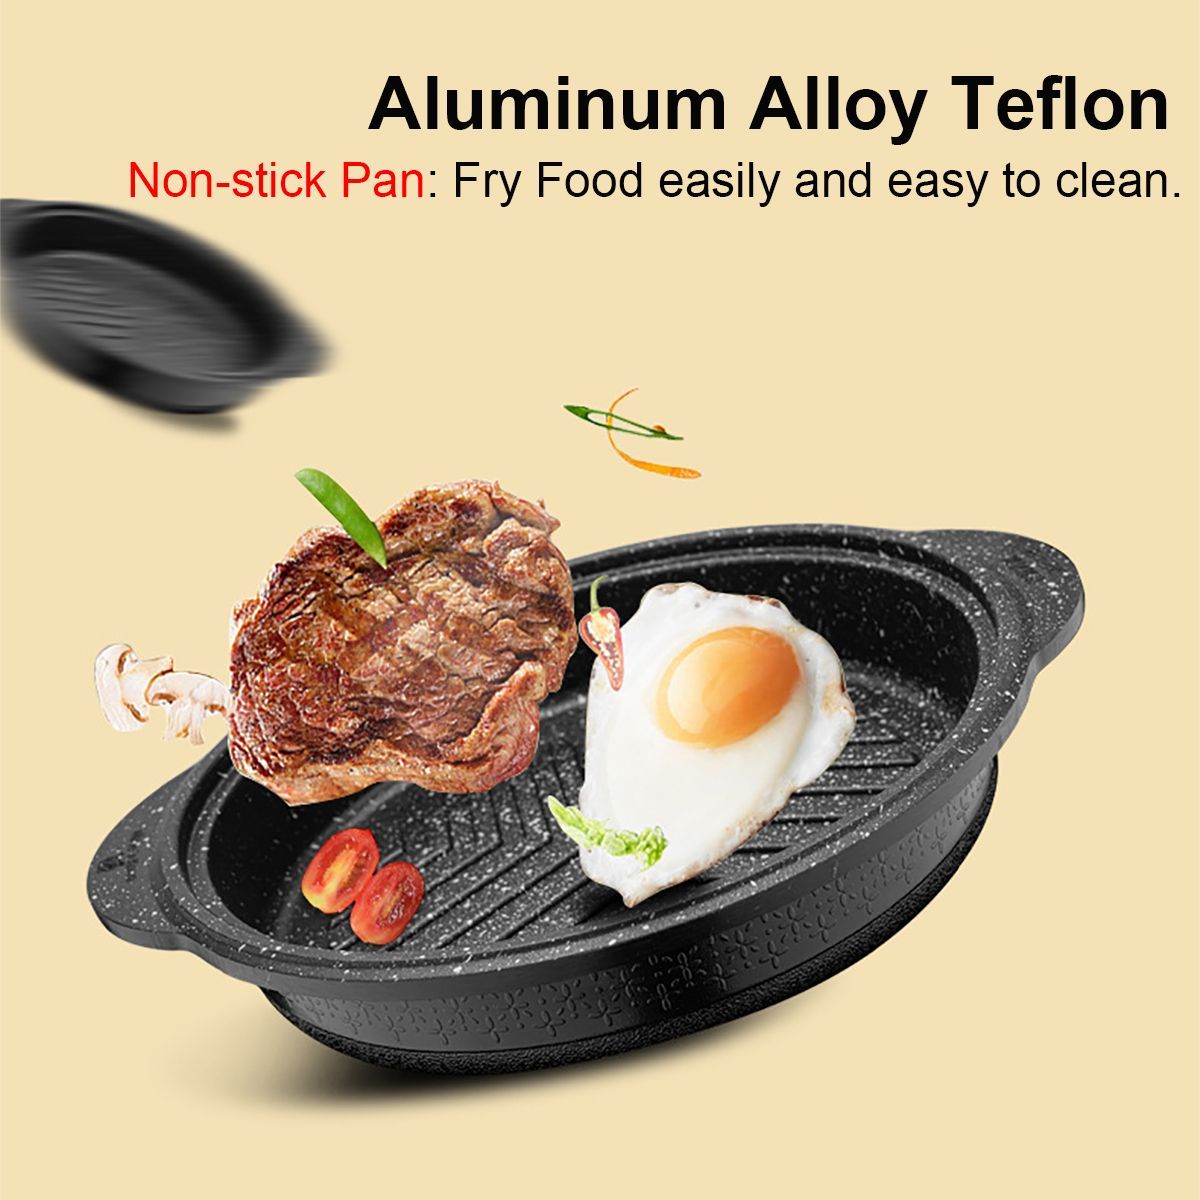 4L-Electric-Cooker-Heating-Pan-Hot-Pot-Soup-Cooking-Plate-BBQ-Grill-Non-stick-1682714